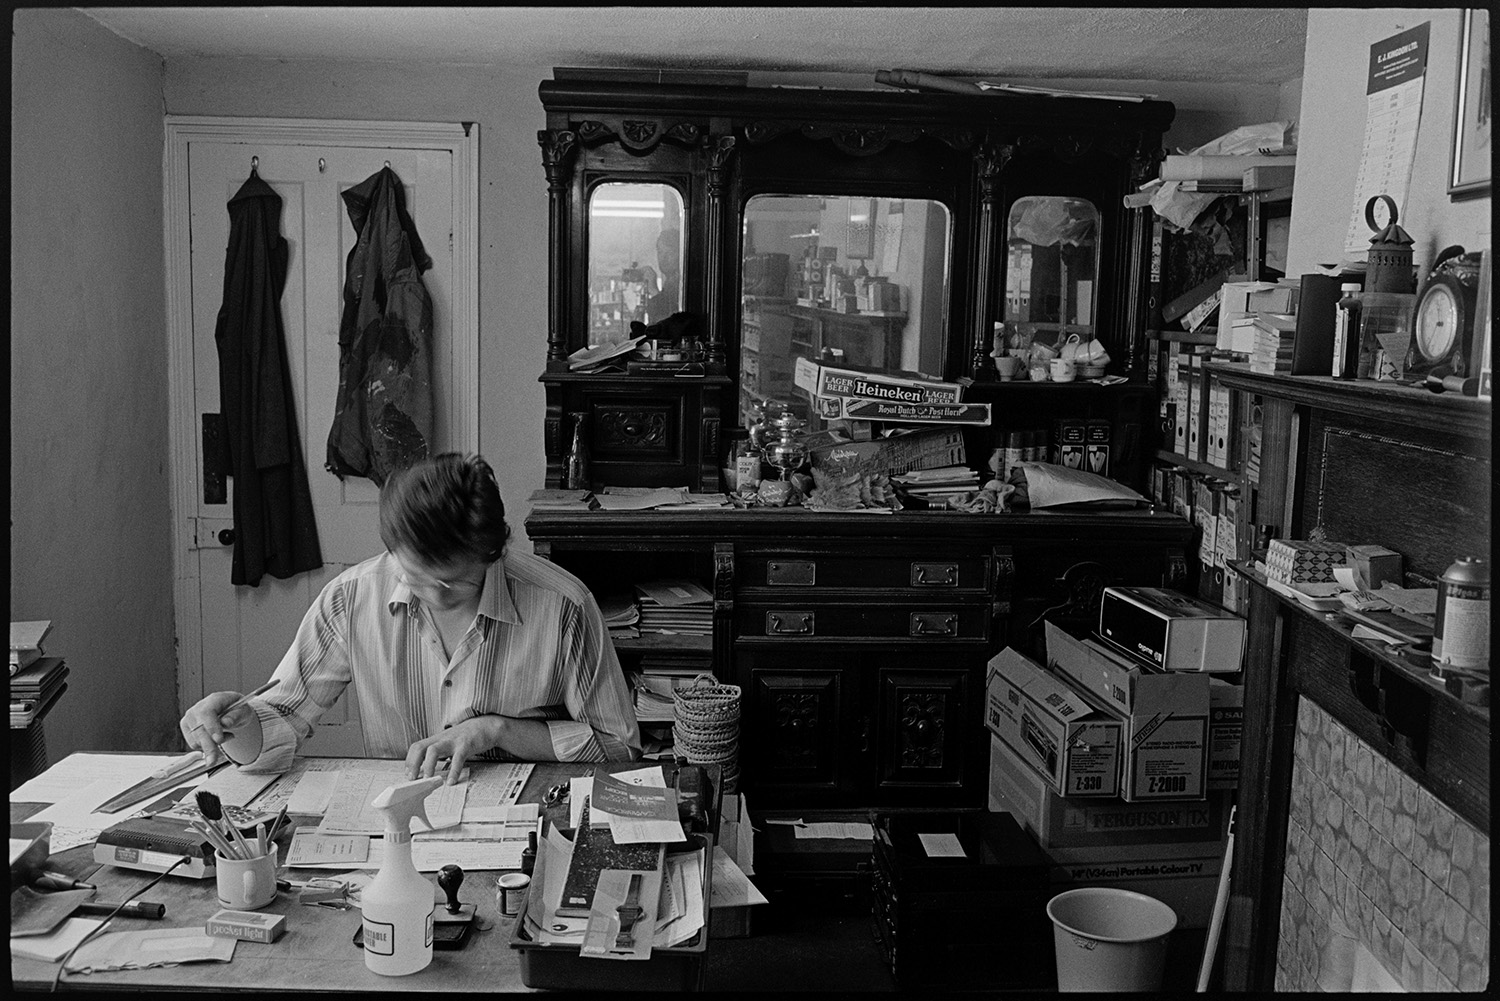 Interior of ironmongers shop. Man working at desk doing accounts. Fine dresser.
[Tim Kingdon working at his desk in the office at A E Kingdon ironmongers in Fore Street, Chulmleigh. A carved dresser and mantelpiece with various items, including files and boxes can be seen in the background.]